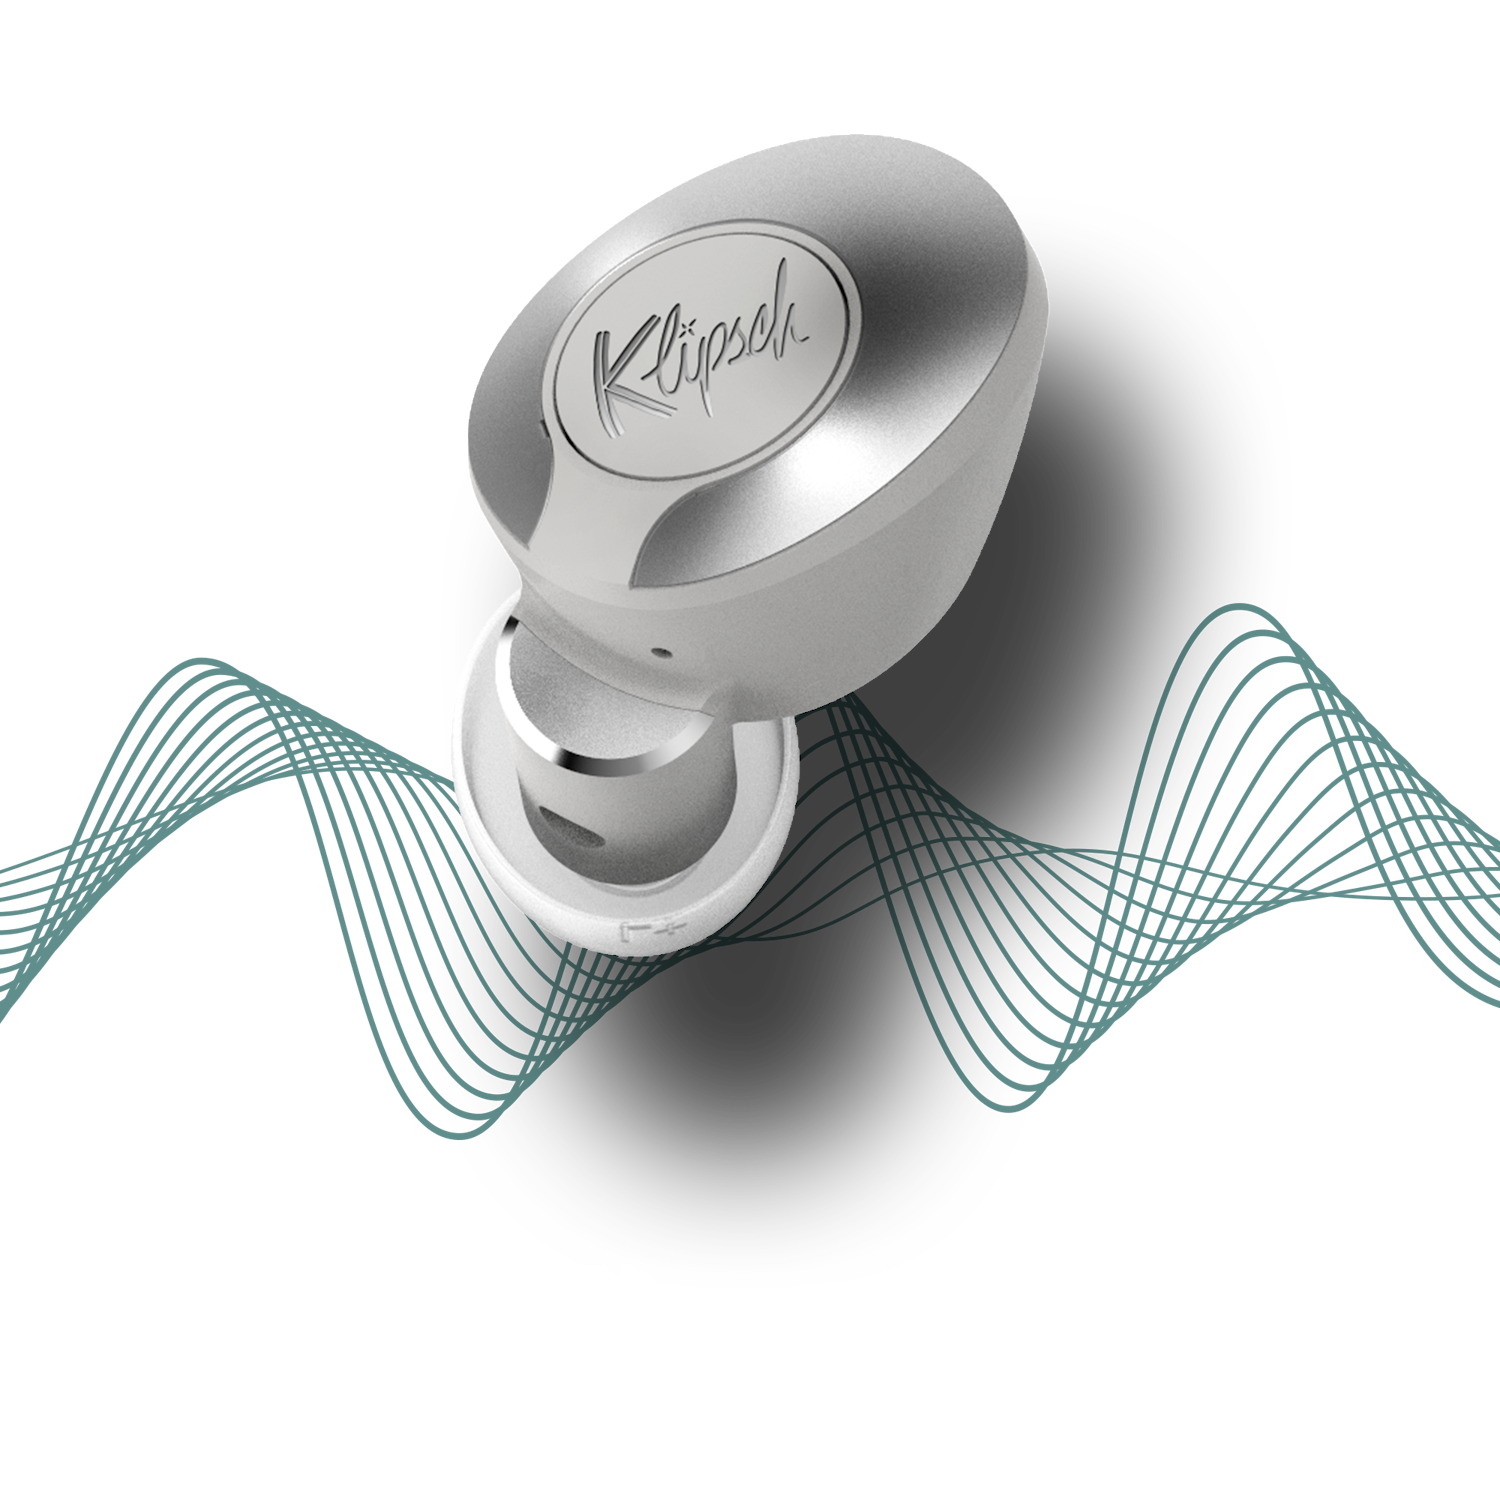 Klipsch T5 II True Wireless ANC earphone with an illustration of wavy lines and a Dirac logo Mobile